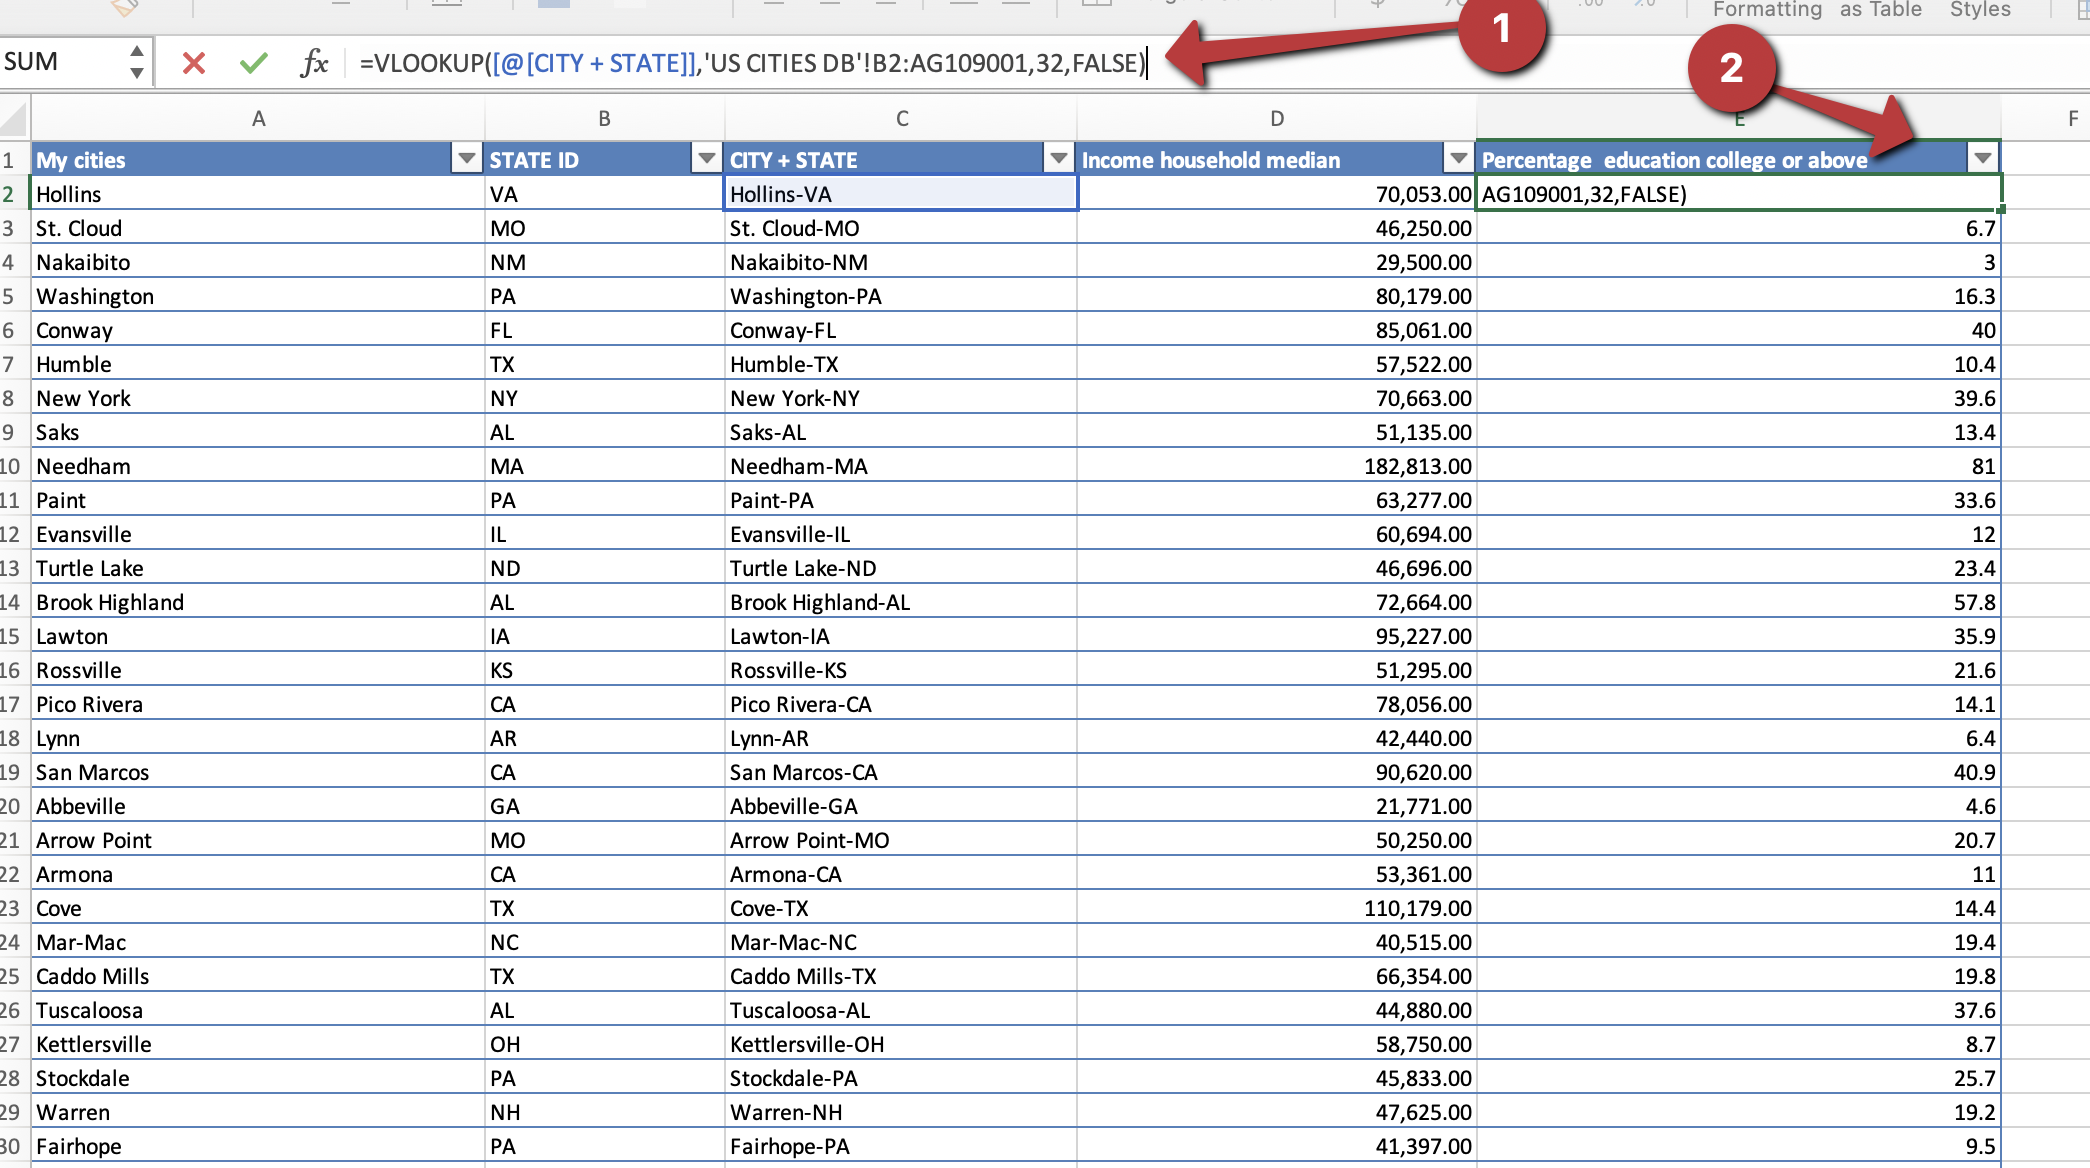 Excel spreadsheet displaying data columns for state ID, city/state, income household median, and percentage education college or above, with highlighted cells indicating the use of a function.